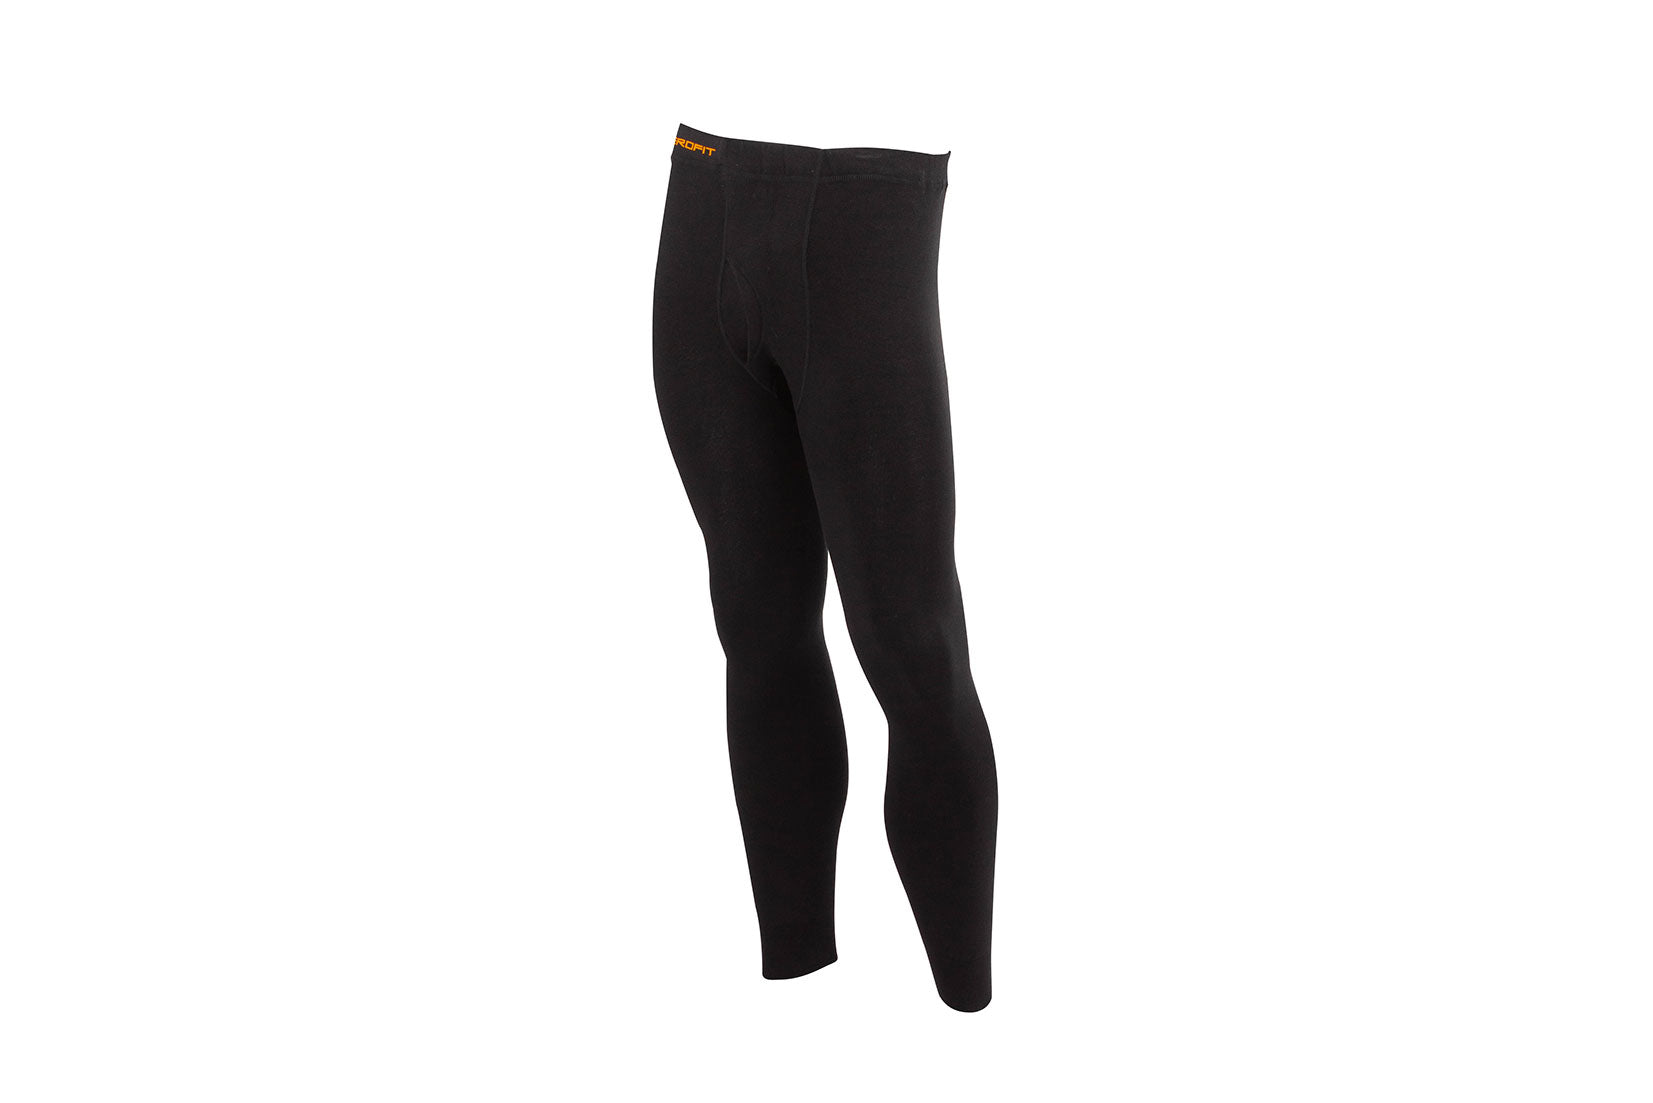 Legging Breed Fit Serenity - Breed Fit